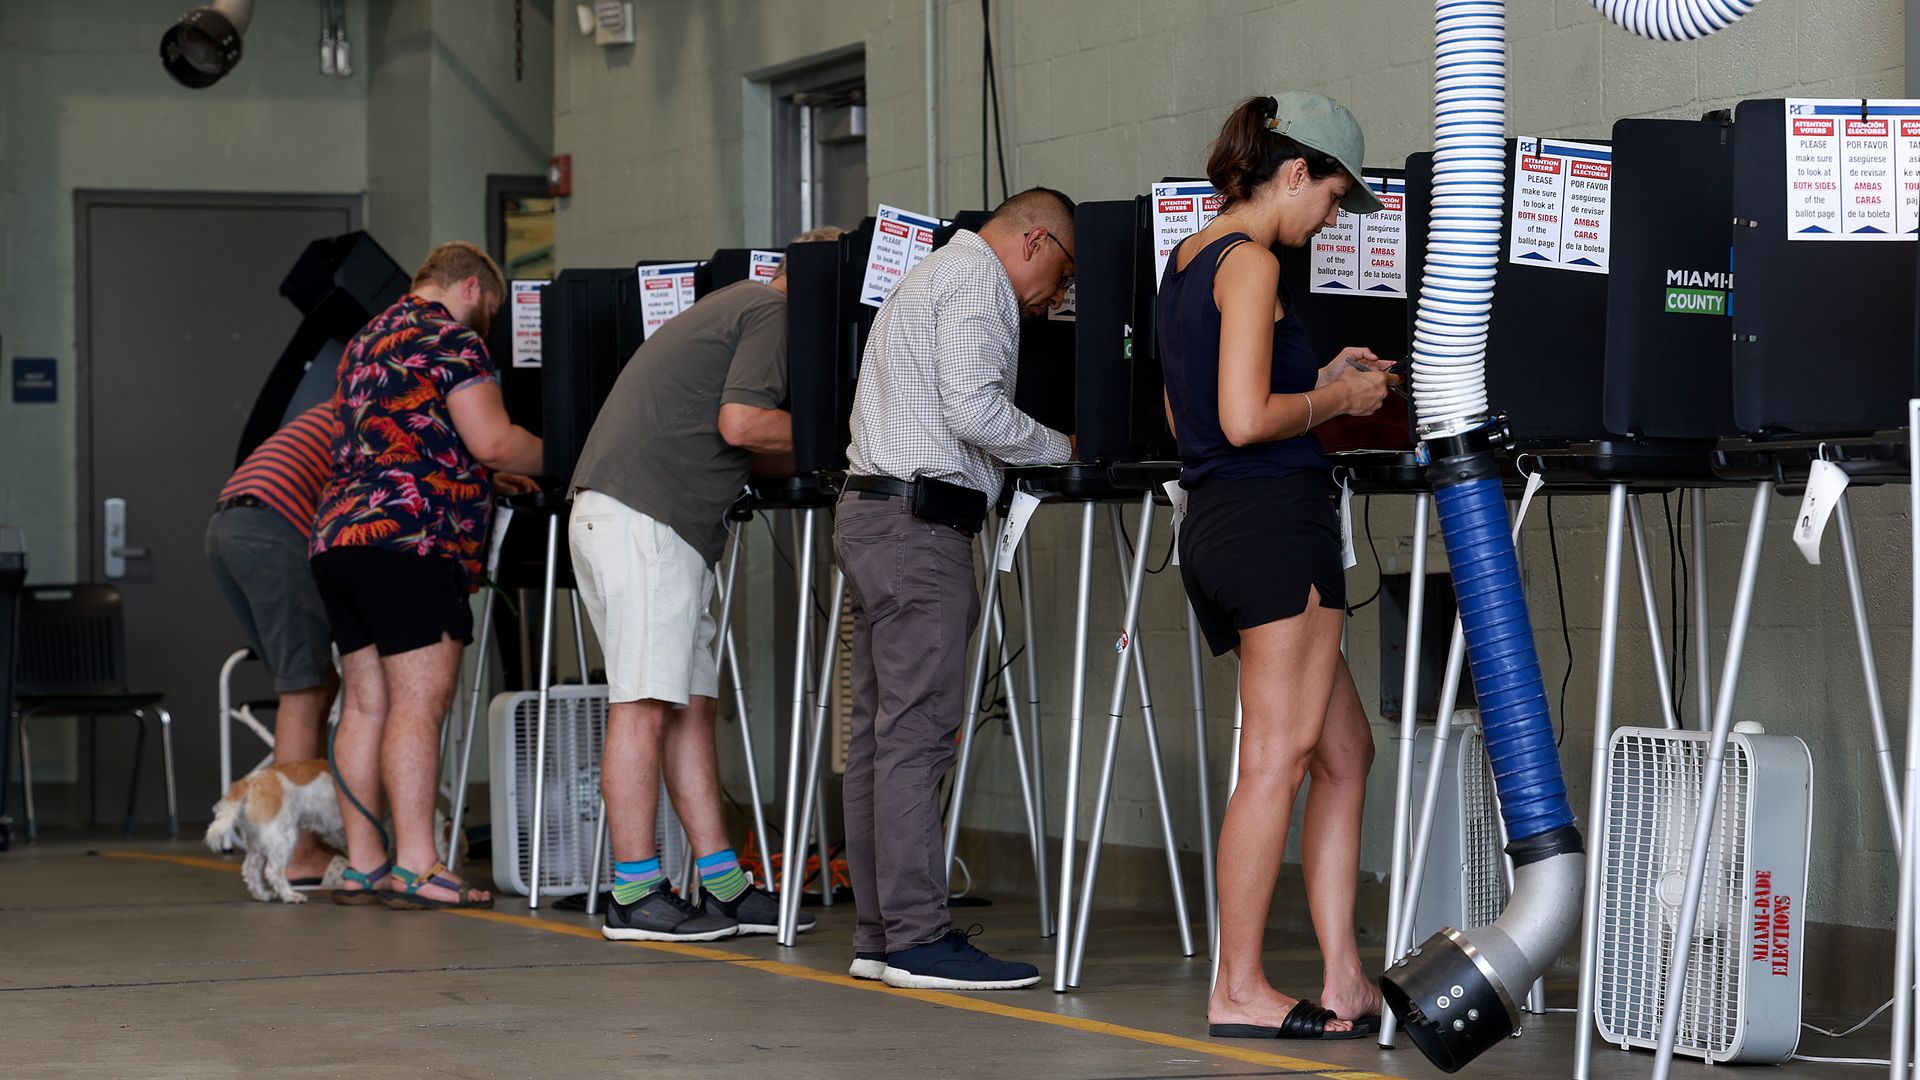 Voters cast their ballots at a polling station setup in a fire station on August 23, 2022 in Miami Beach, Florida.